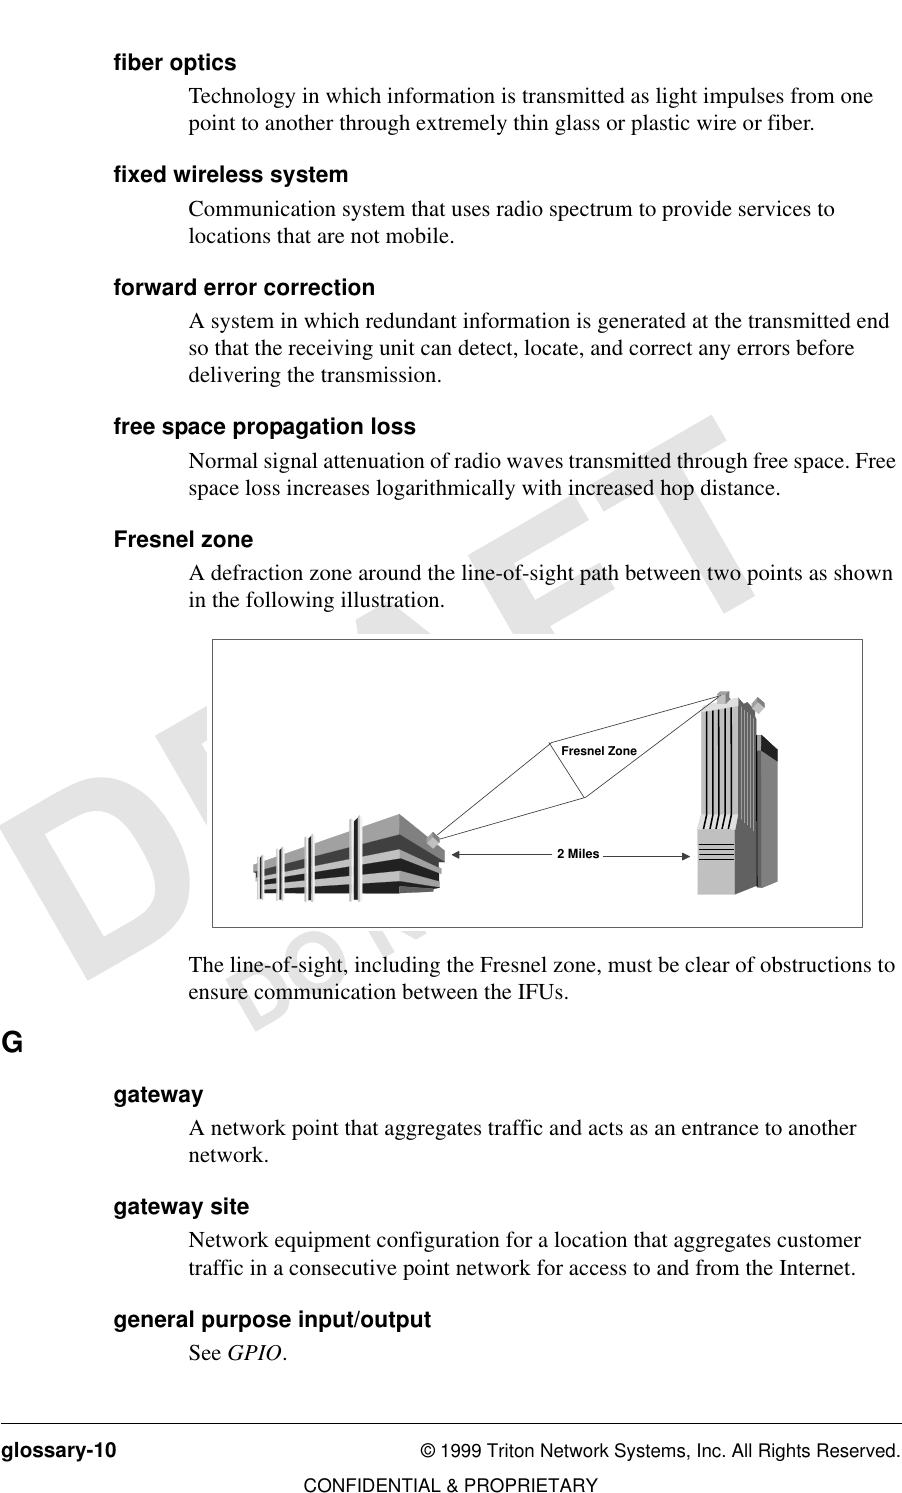 glossary-10 © 1999 Triton Network Systems, Inc. All Rights Reserved.CONFIDENTIAL &amp; PROPRIETARYDO NOT COPYfiber opticsTechnology in which information is transmitted as light impulses from one point to another through extremely thin glass or plastic wire or fiber.fixed wireless systemCommunication system that uses radio spectrum to provide services to locations that are not mobile.forward error correctionA system in which redundant information is generated at the transmitted end so that the receiving unit can detect, locate, and correct any errors before delivering the transmission.free space propagation lossNormal signal attenuation of radio waves transmitted through free space. Free space loss increases logarithmically with increased hop distance. Fresnel zoneA defraction zone around the line-of-sight path between two points as shown in the following illustration.The line-of-sight, including the Fresnel zone, must be clear of obstructions to ensure communication between the IFUs.GgatewayA network point that aggregates traffic and acts as an entrance to another network.gateway siteNetwork equipment configuration for a location that aggregates customer traffic in a consecutive point network for access to and from the Internet.general purpose input/outputSee GPIO.2 MilesFresnel Zone